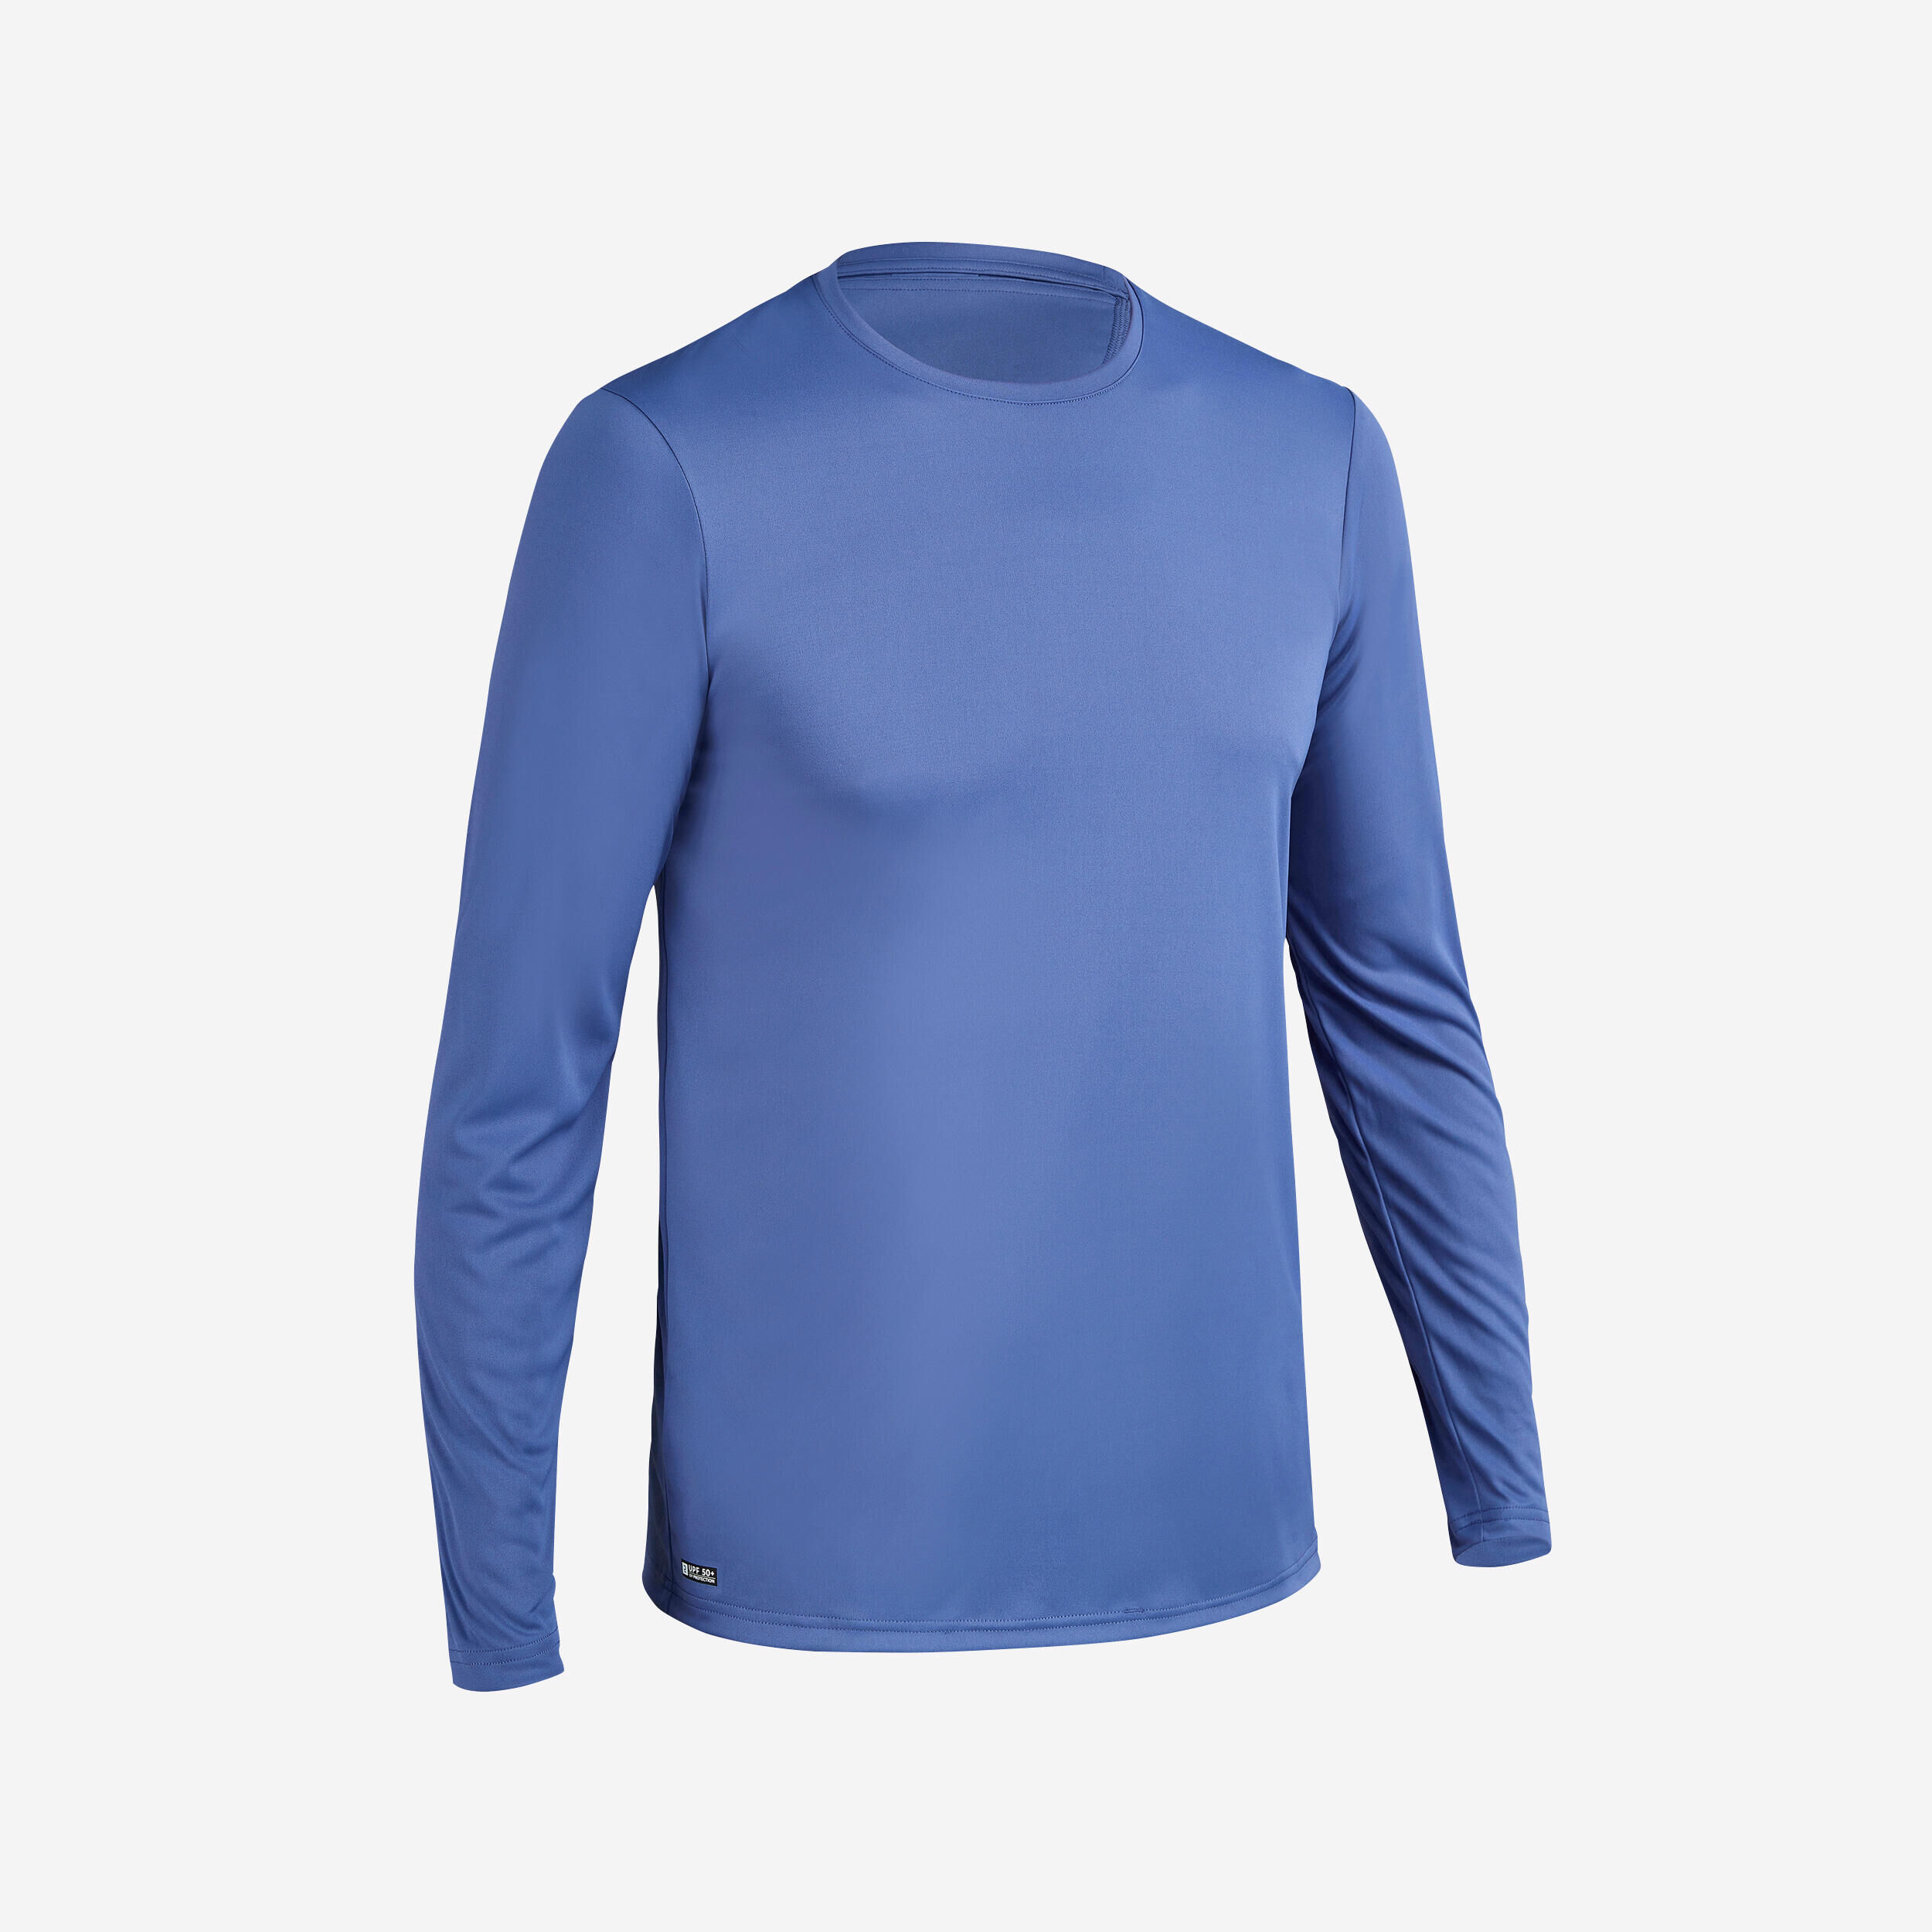 OLAIAN Men's surfing WATER T-SHIRT long sleeve UV-protection top - Blue